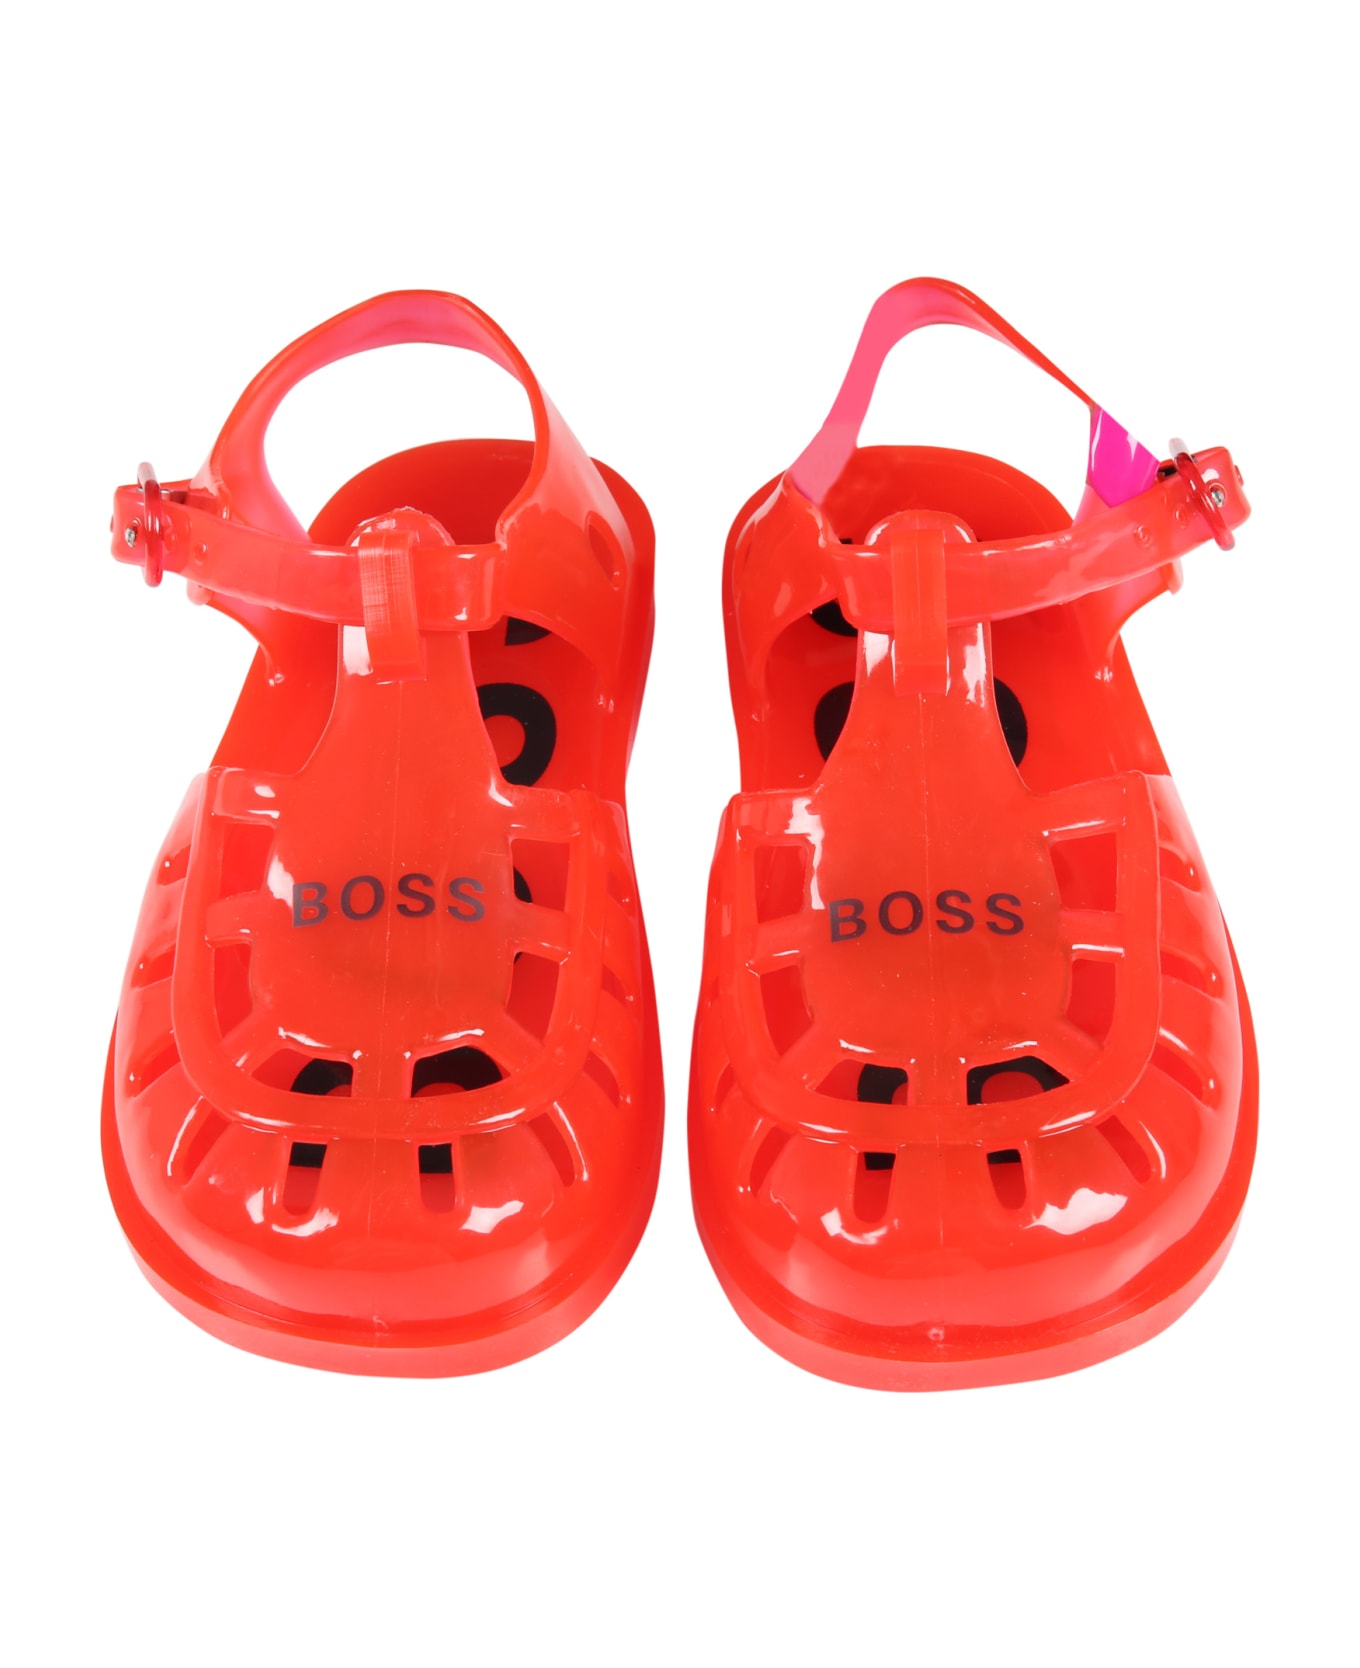 Hugo Boss Red Sandals For Boy - Red